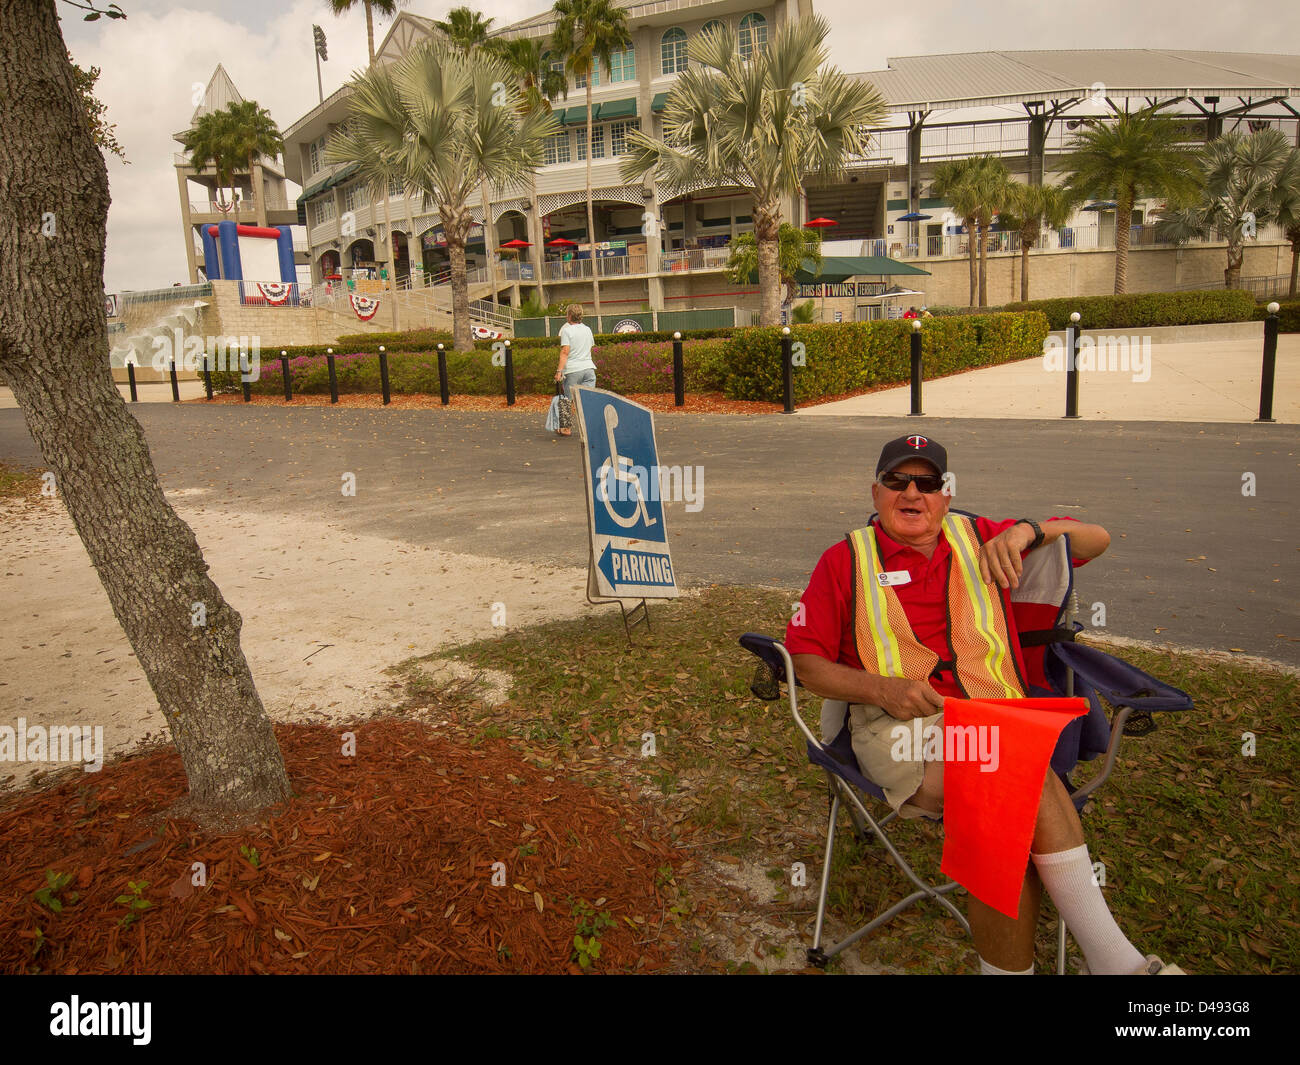 Retiree takes it easy as a parking lot attendant  helping baseball fans watch major league baseball teams in Florida. Stock Photo